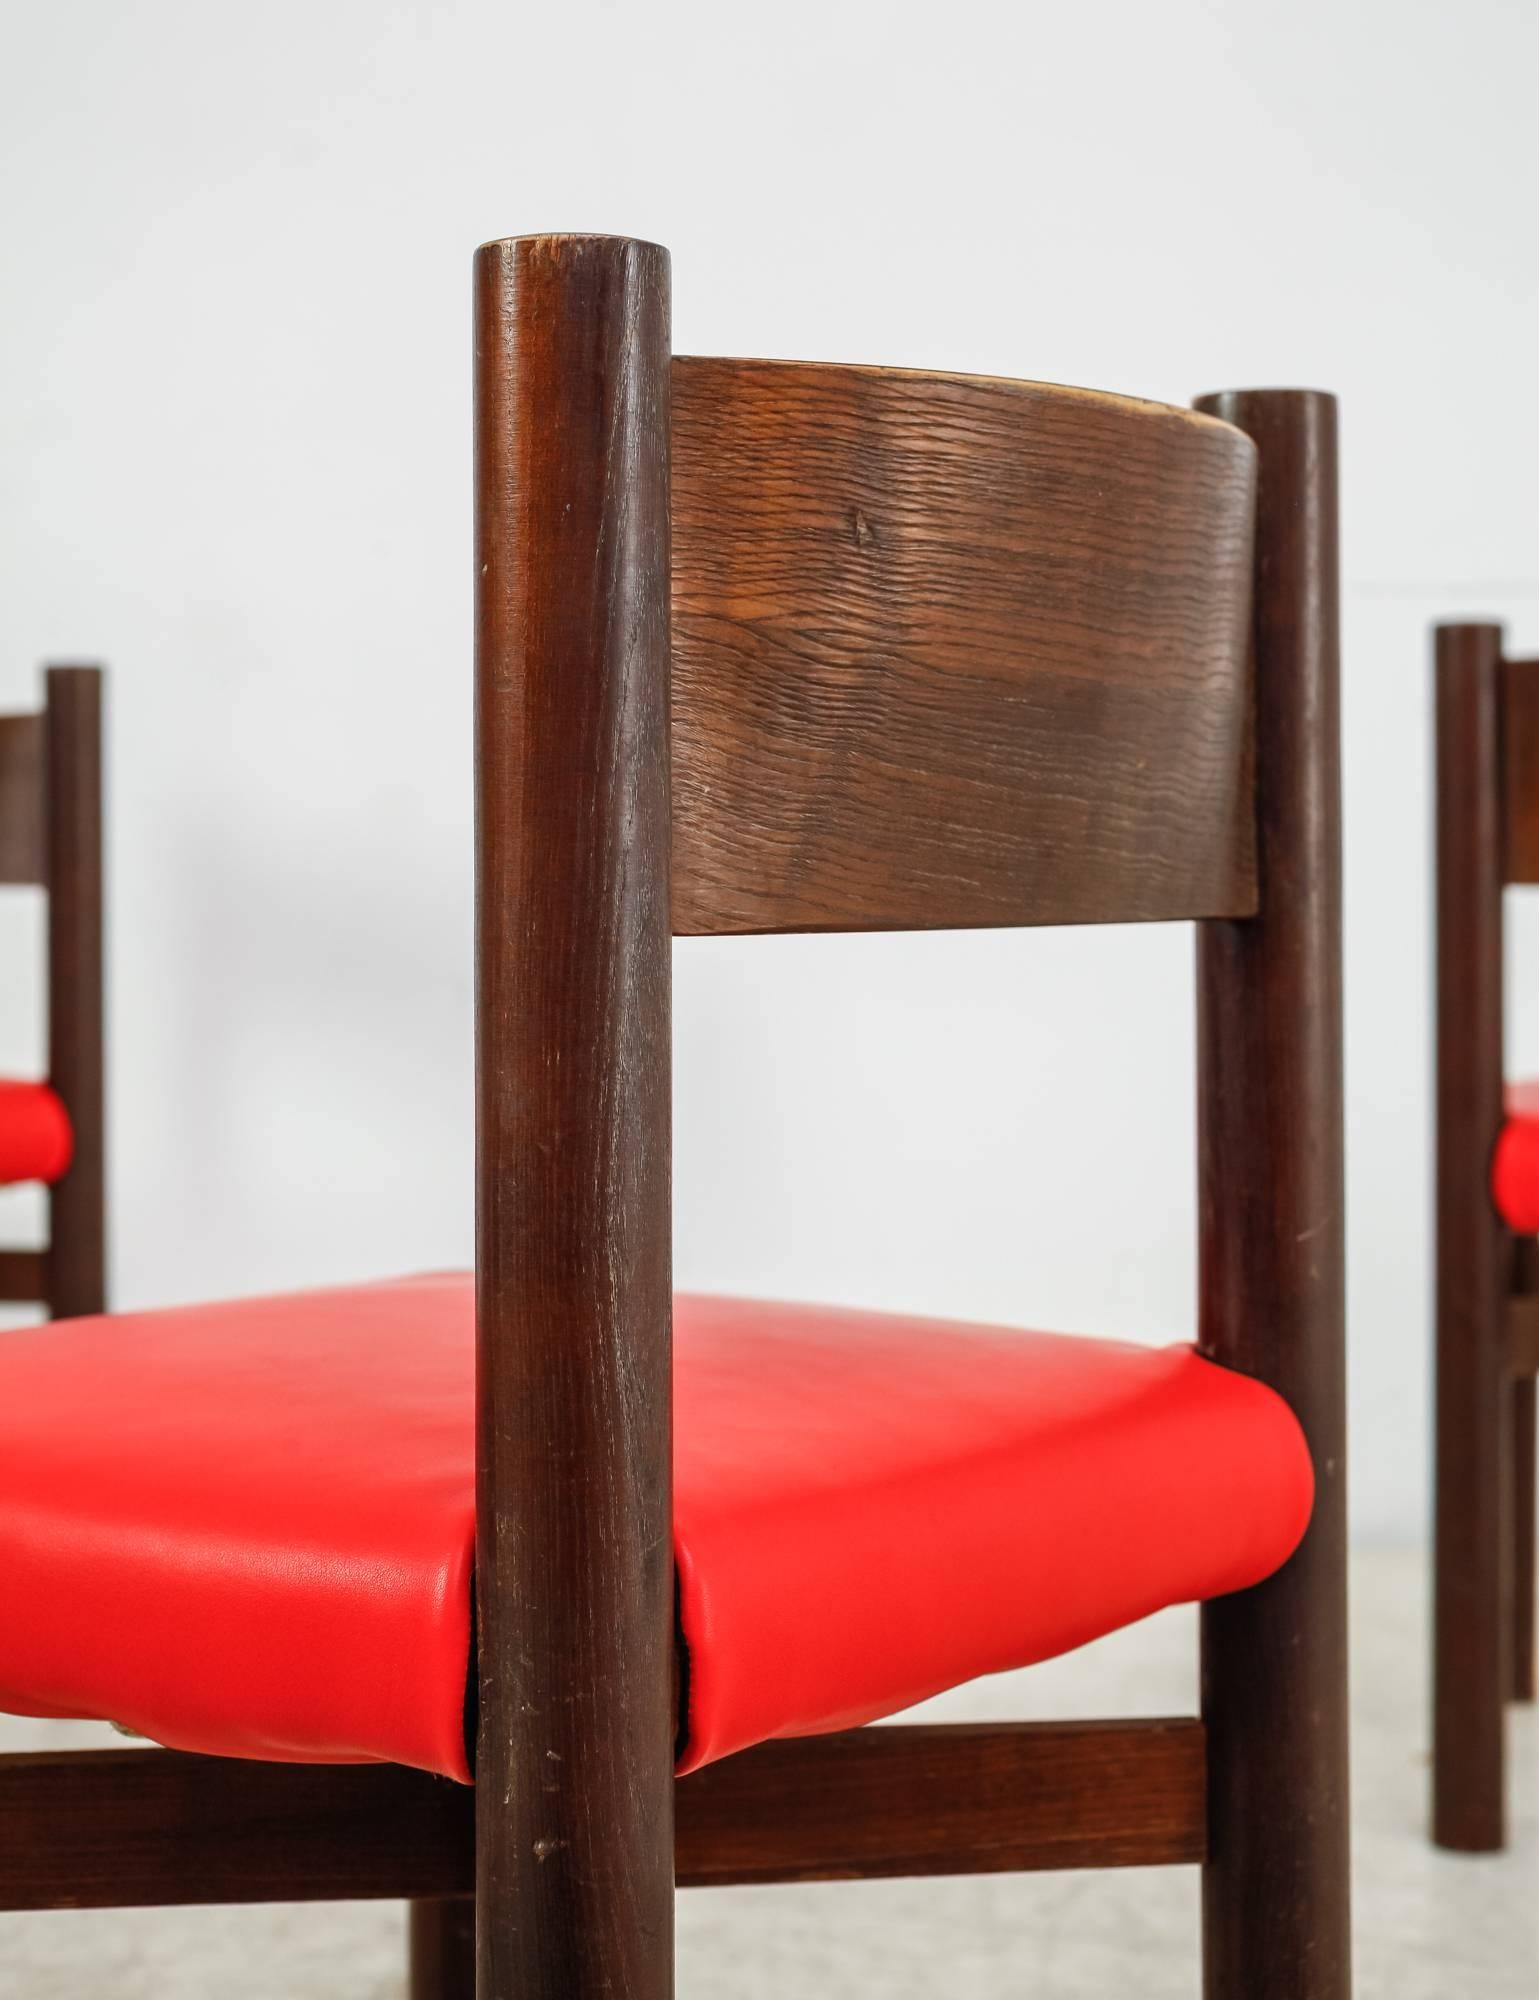 Woven Charlotte Perriand Set of Four Courchevel Chairs with Red Leather, France, 1960s For Sale